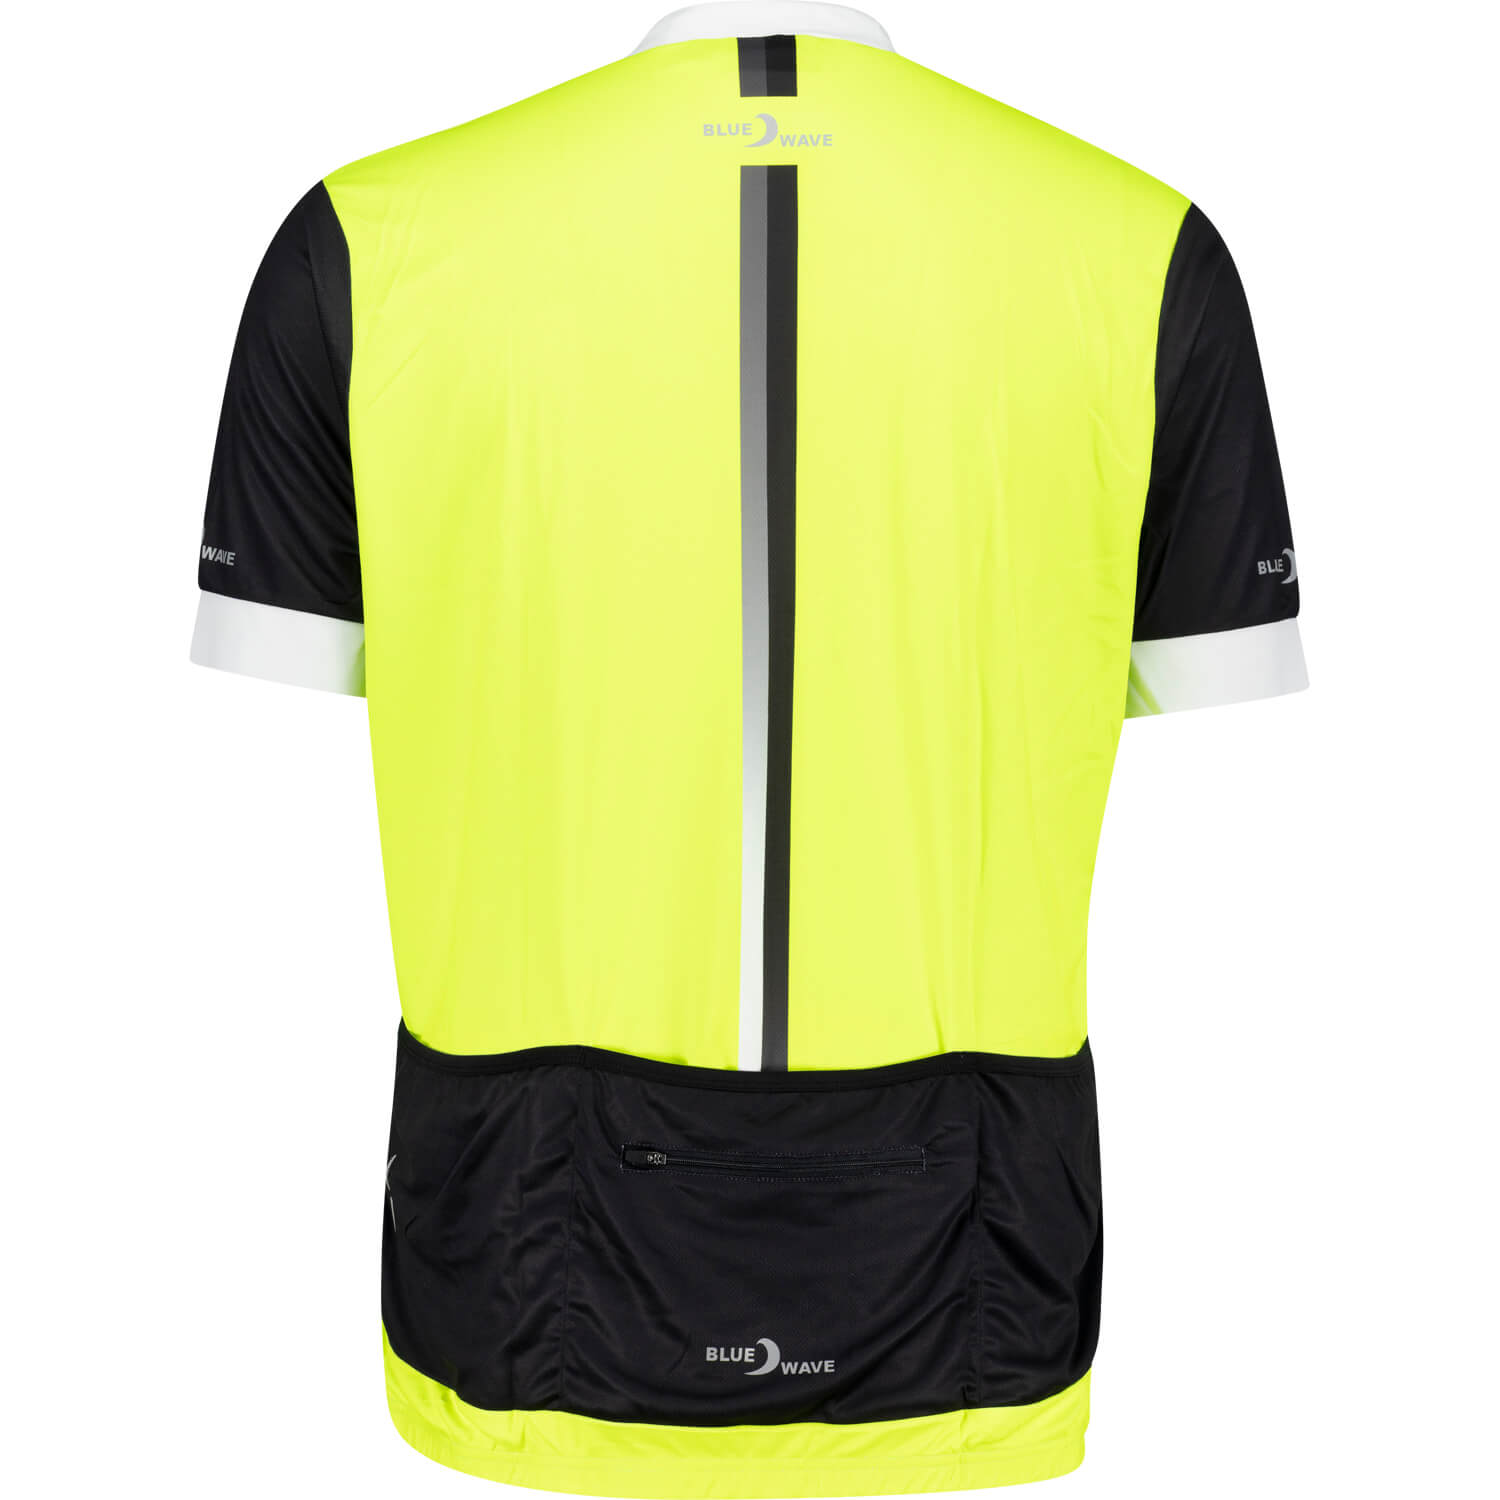 Bike shirt "Alex" in neon yellow by Blue Wave for men up to oversize 8XL